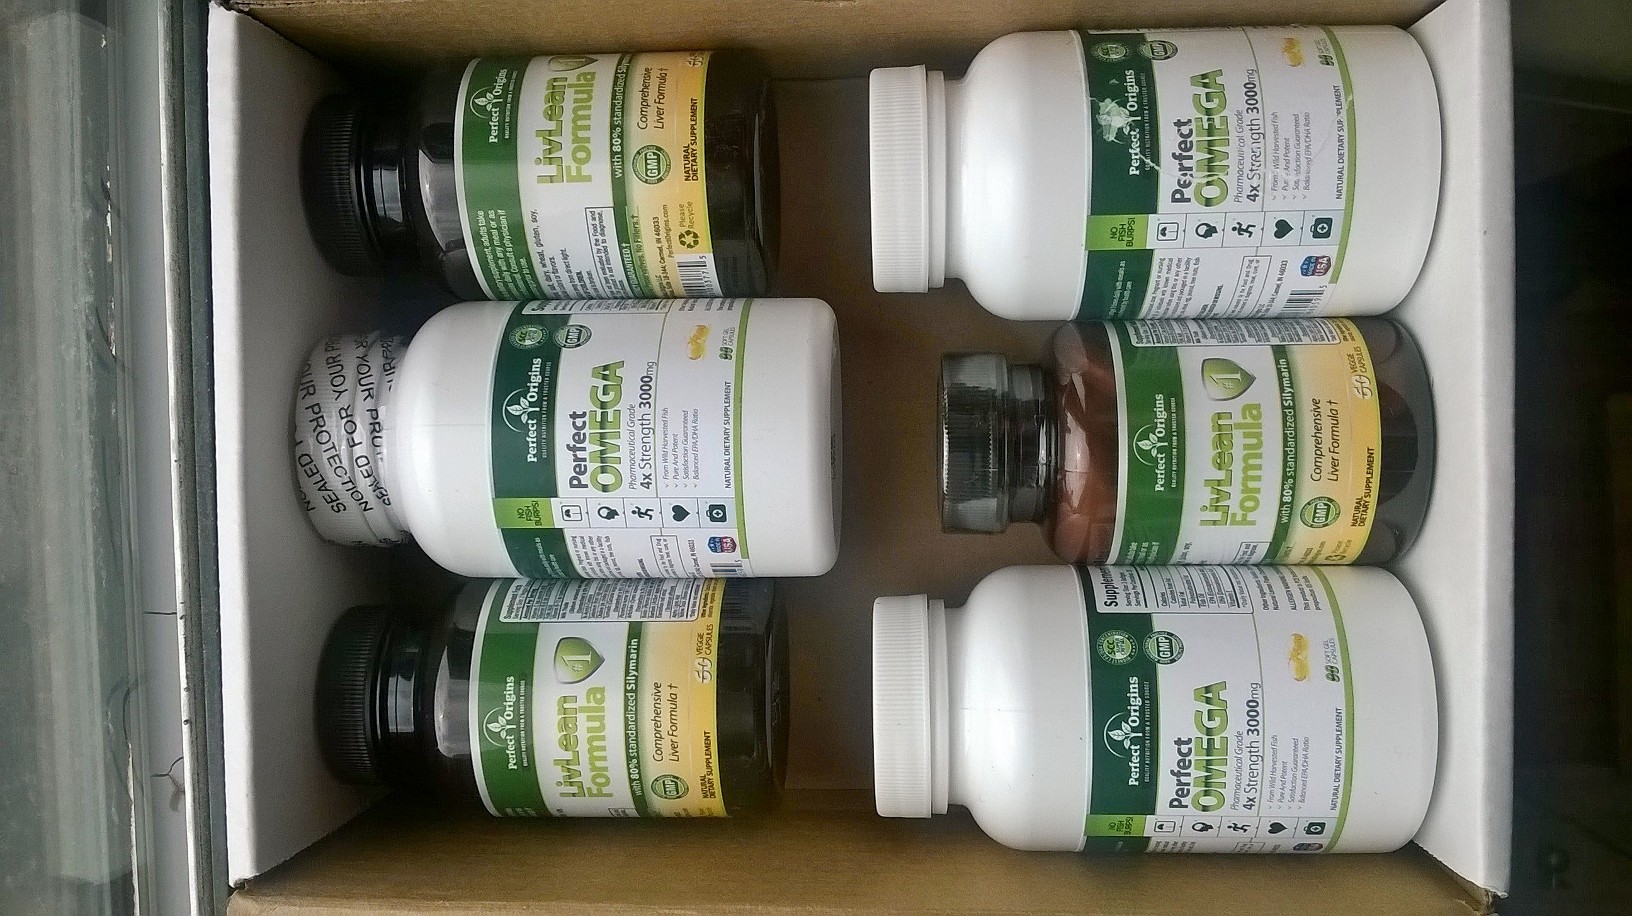 Perfect Origins supplements.  LivLean formula 1 & Omega.  Unopened portions & empty bottles ready to be returned.